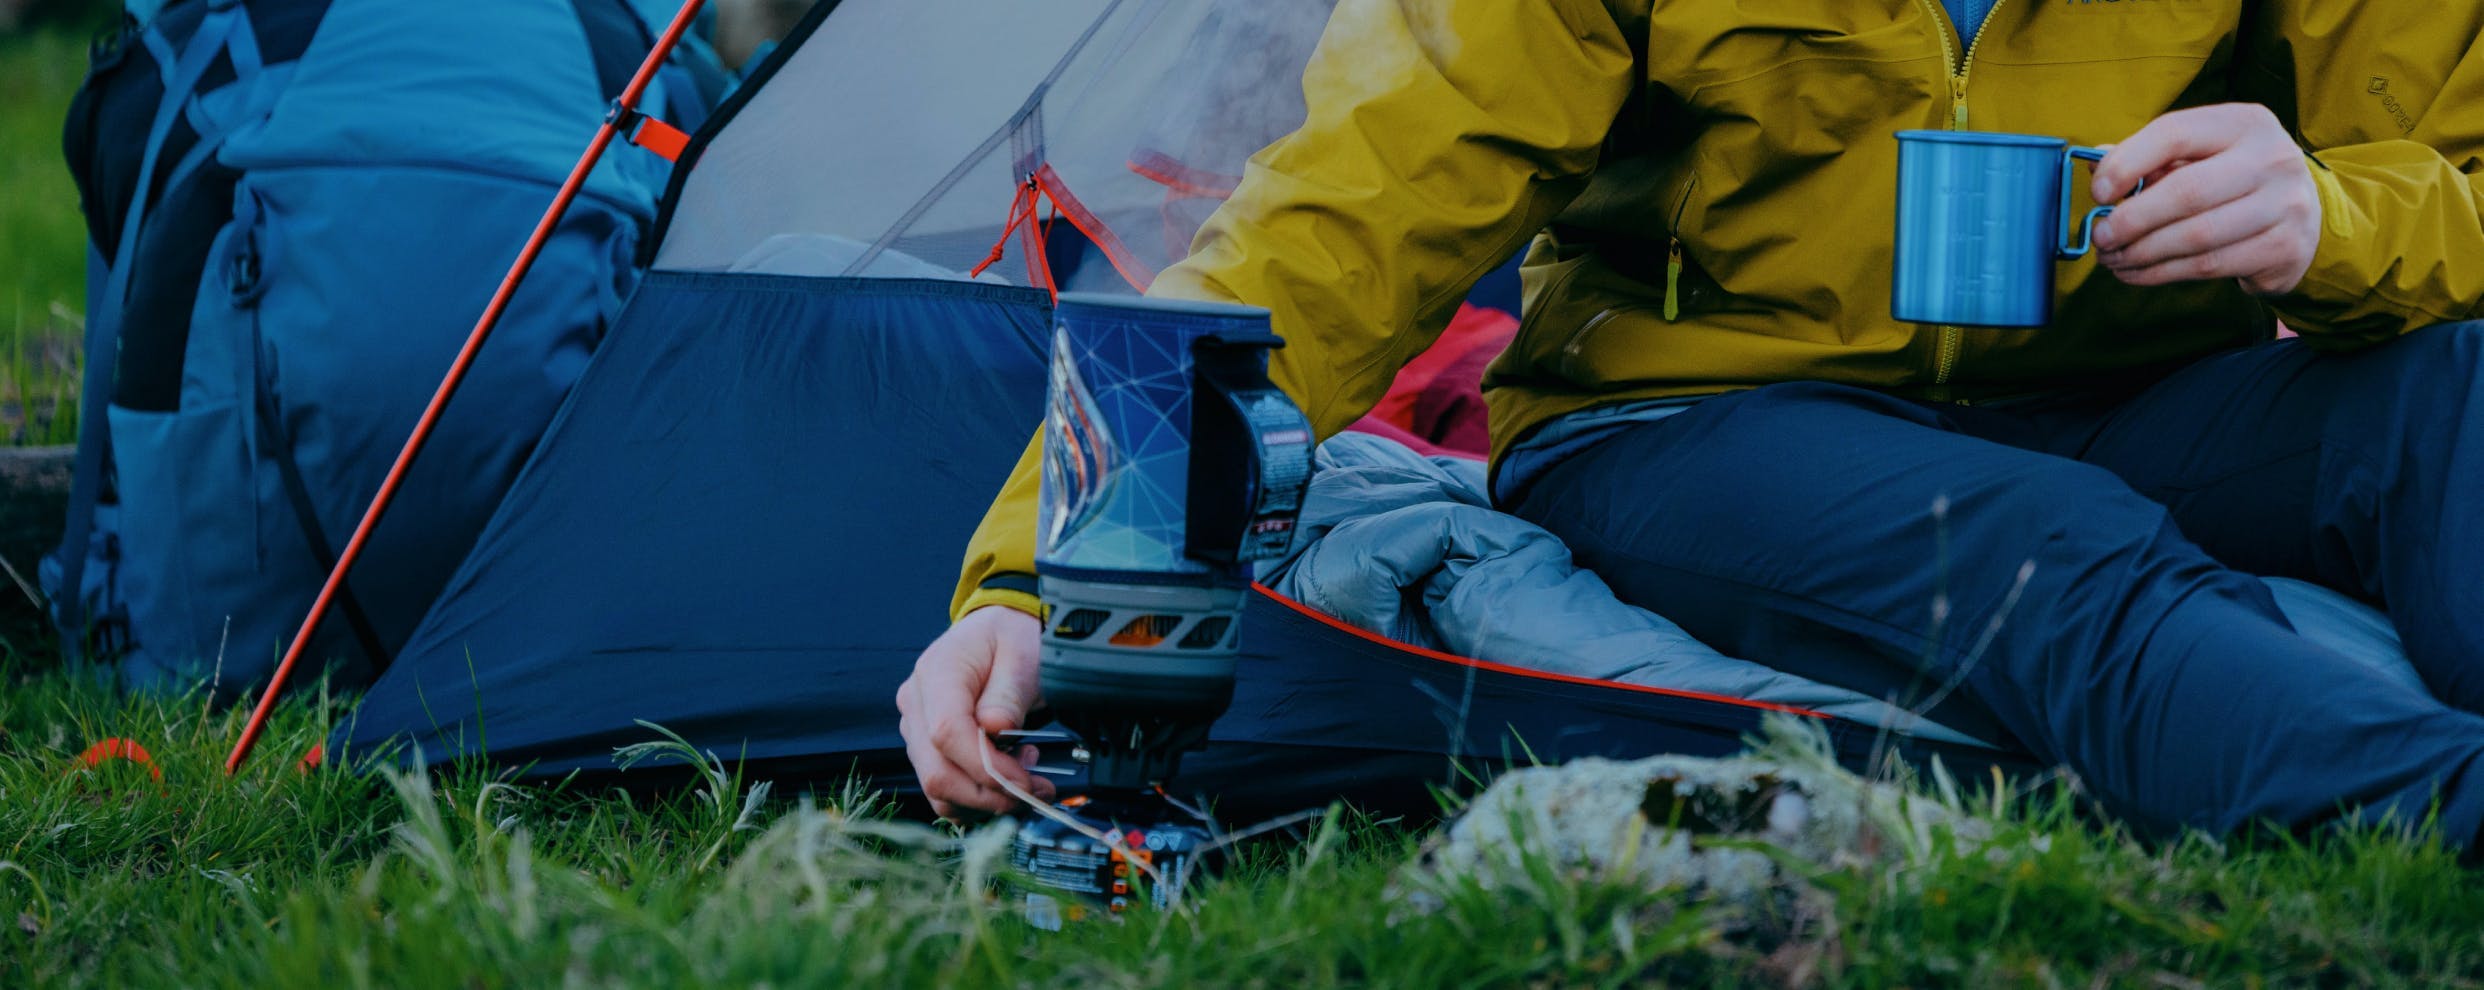 Find portable pots, quick-boil stoves, titanium sporks – everything you need for al fresco campouts.